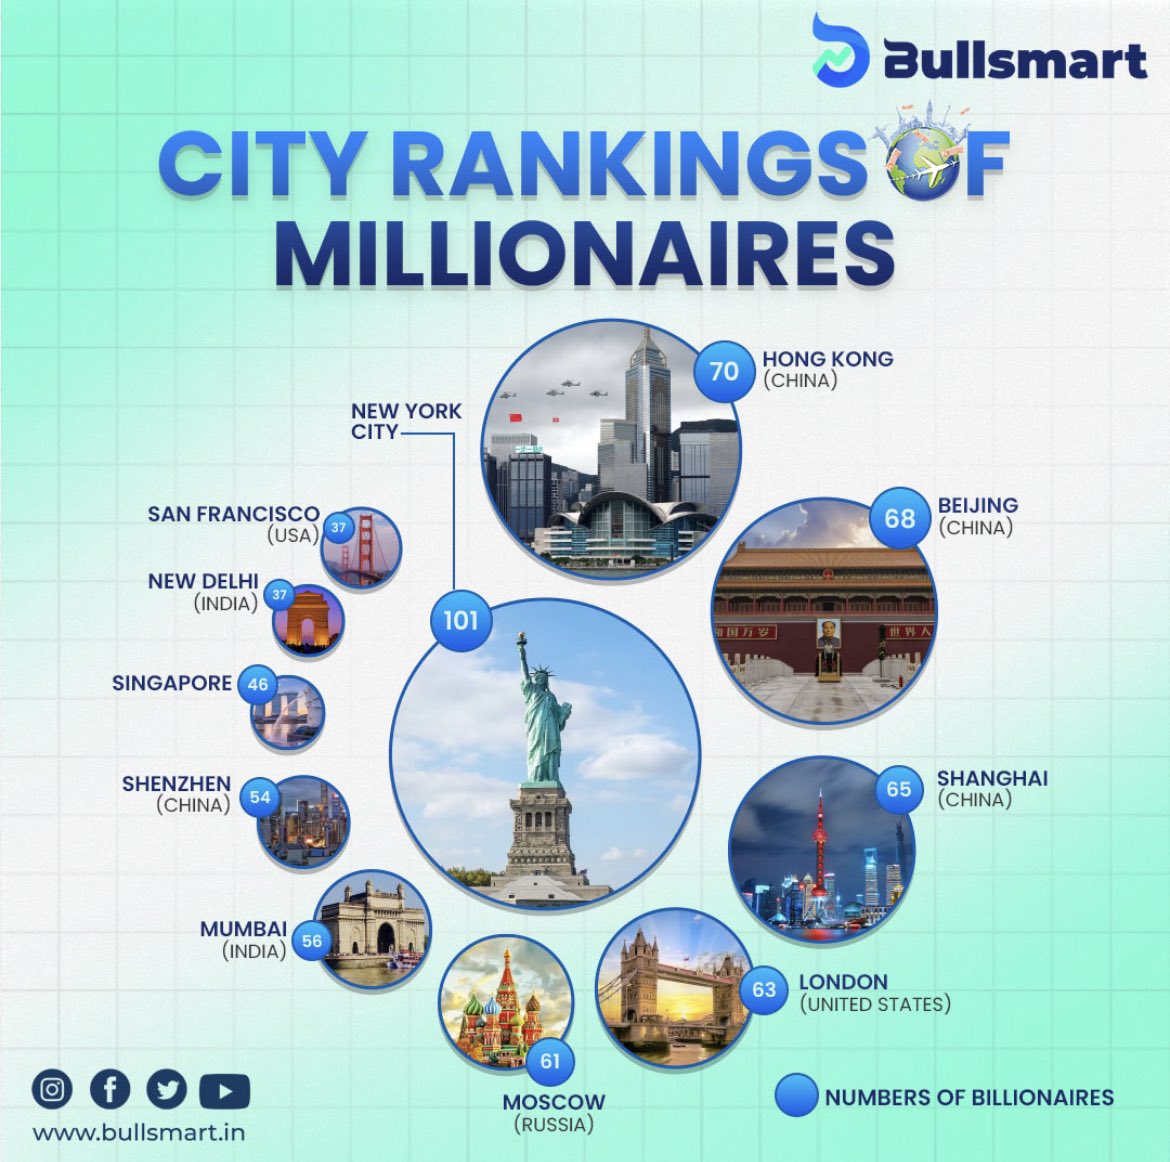 Check out the cities ranking of Millionaires 💵.

Follow @Bullsmartapp for more such content.

#india #bullsmart #stocks #stockmarket #invest #investment #investindia #indiancities #millionaire #hongkong #topcities #newyorkcity #trending #tfendingpost